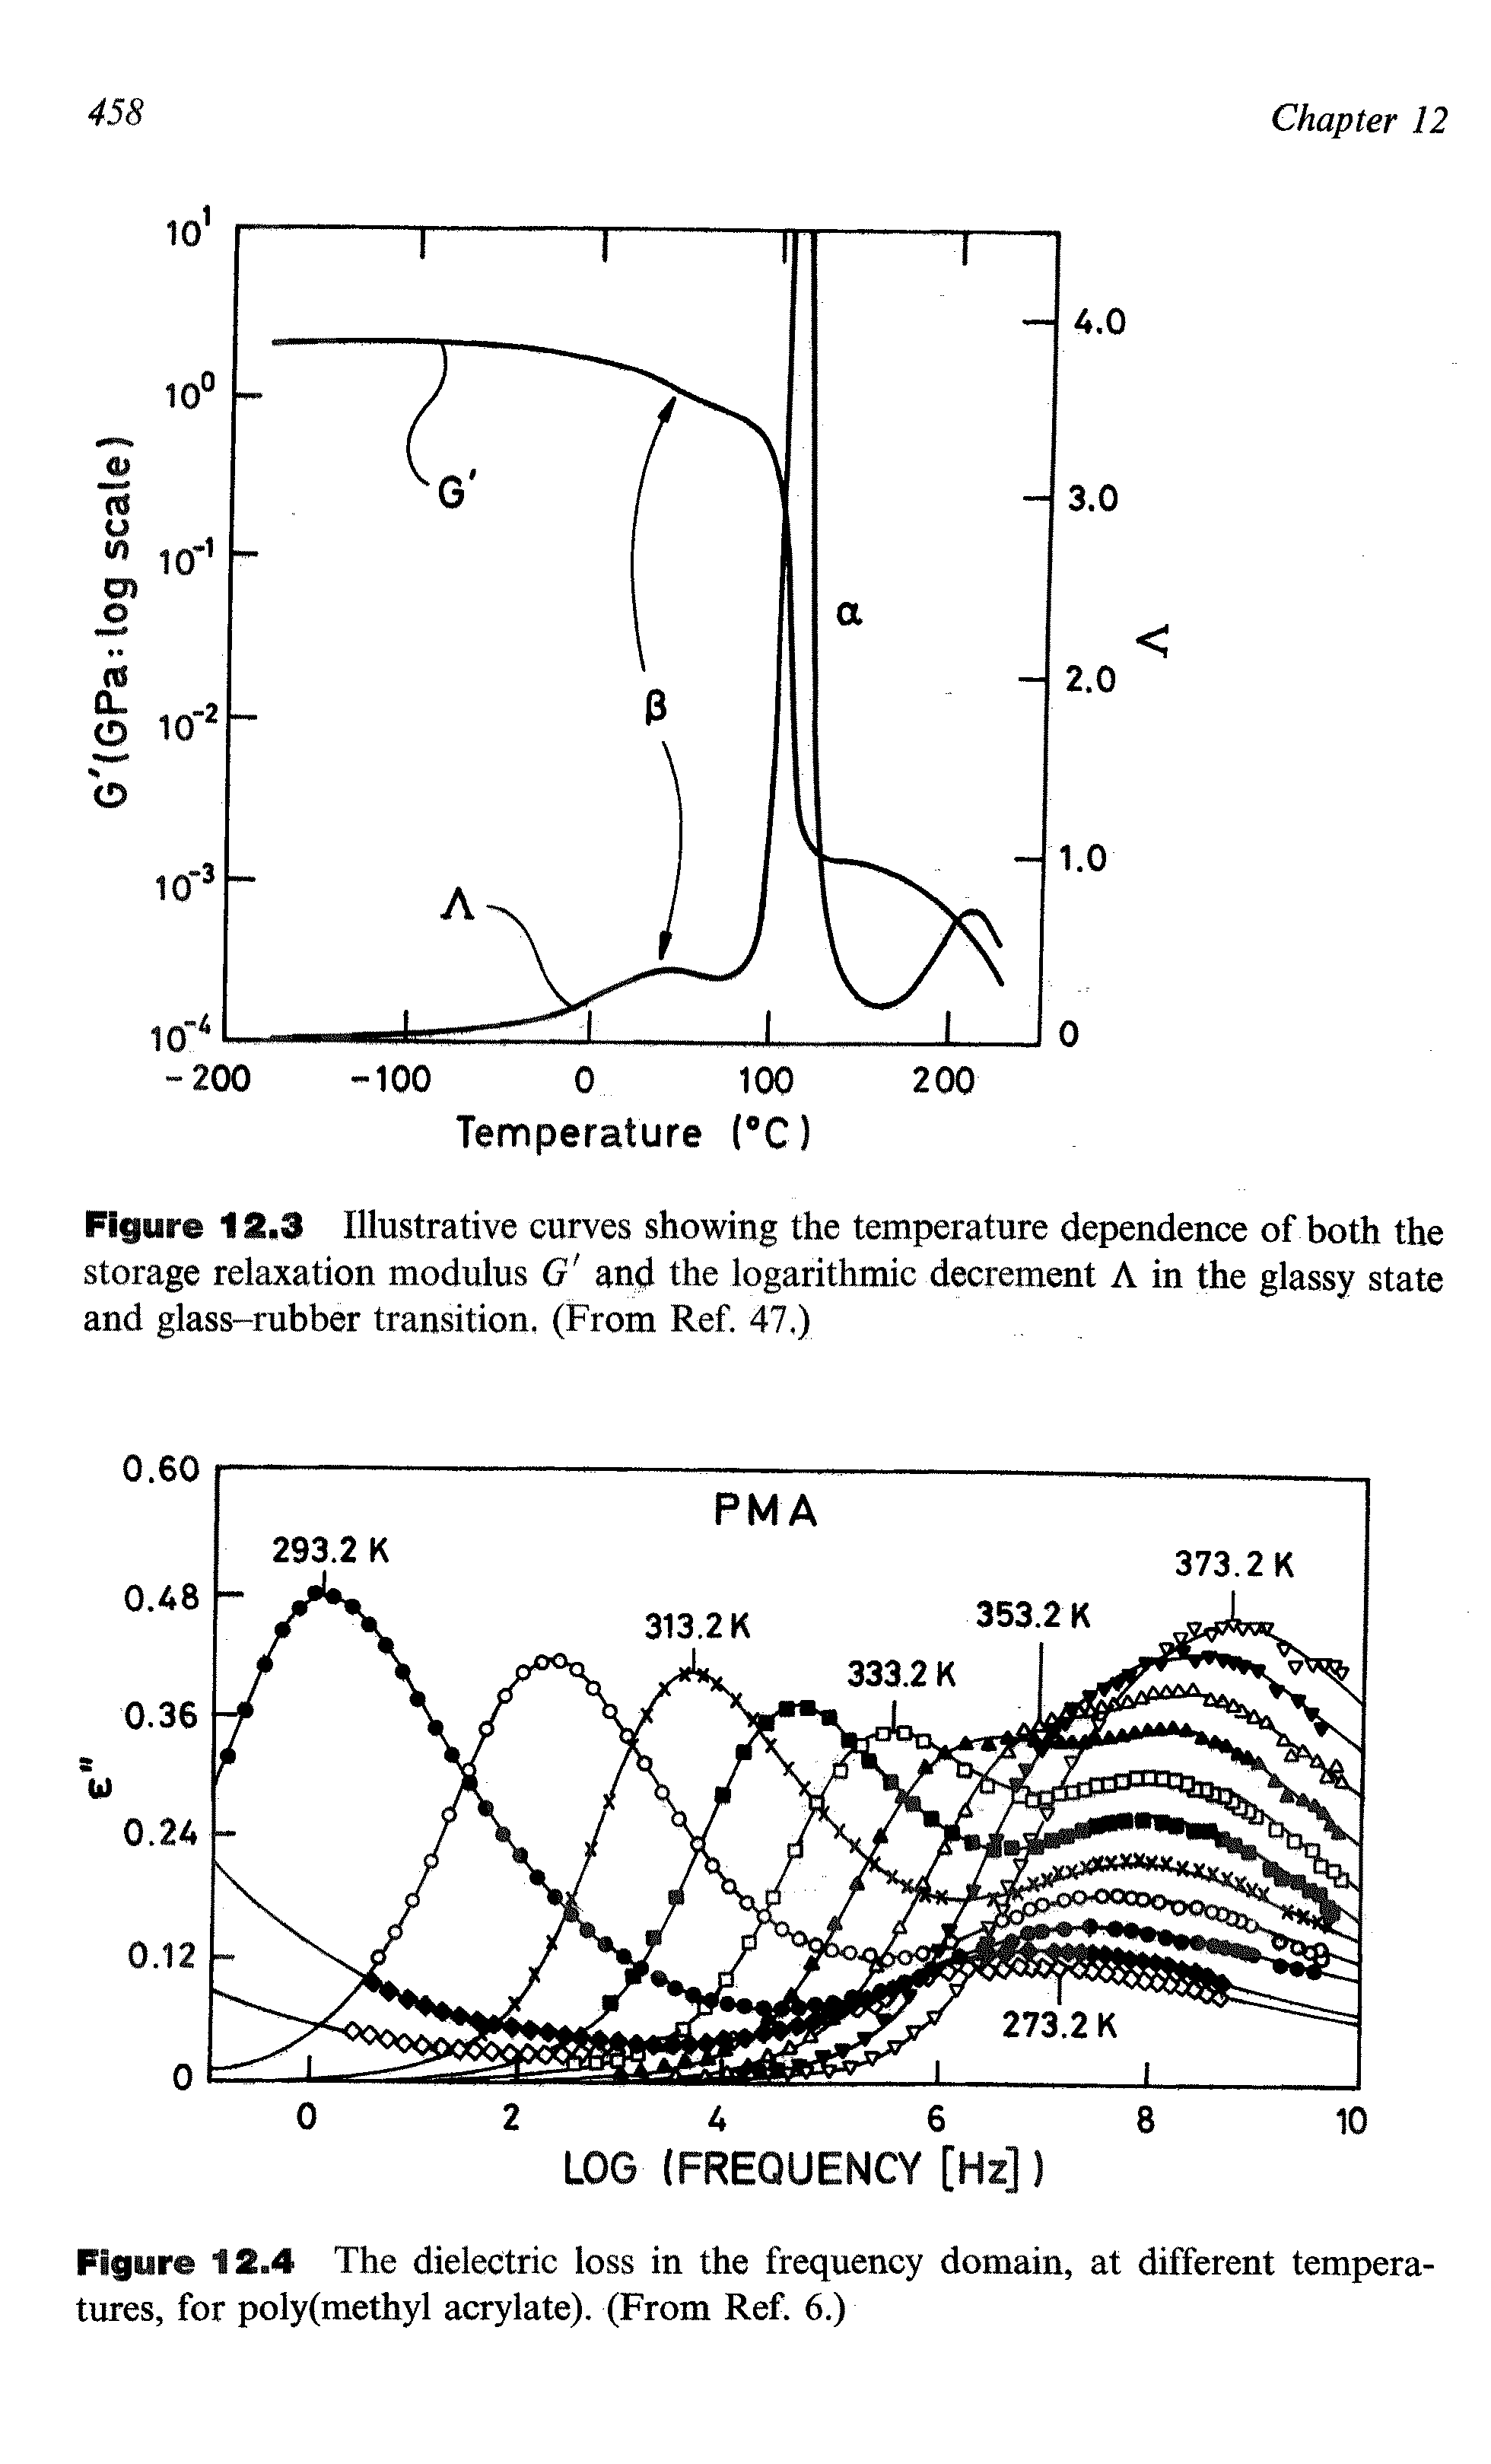 Figure 12.4 The dielectric loss in the frequency domain, at different temperatures, for poly(methyl acrylate). (From Ref. 6.)...